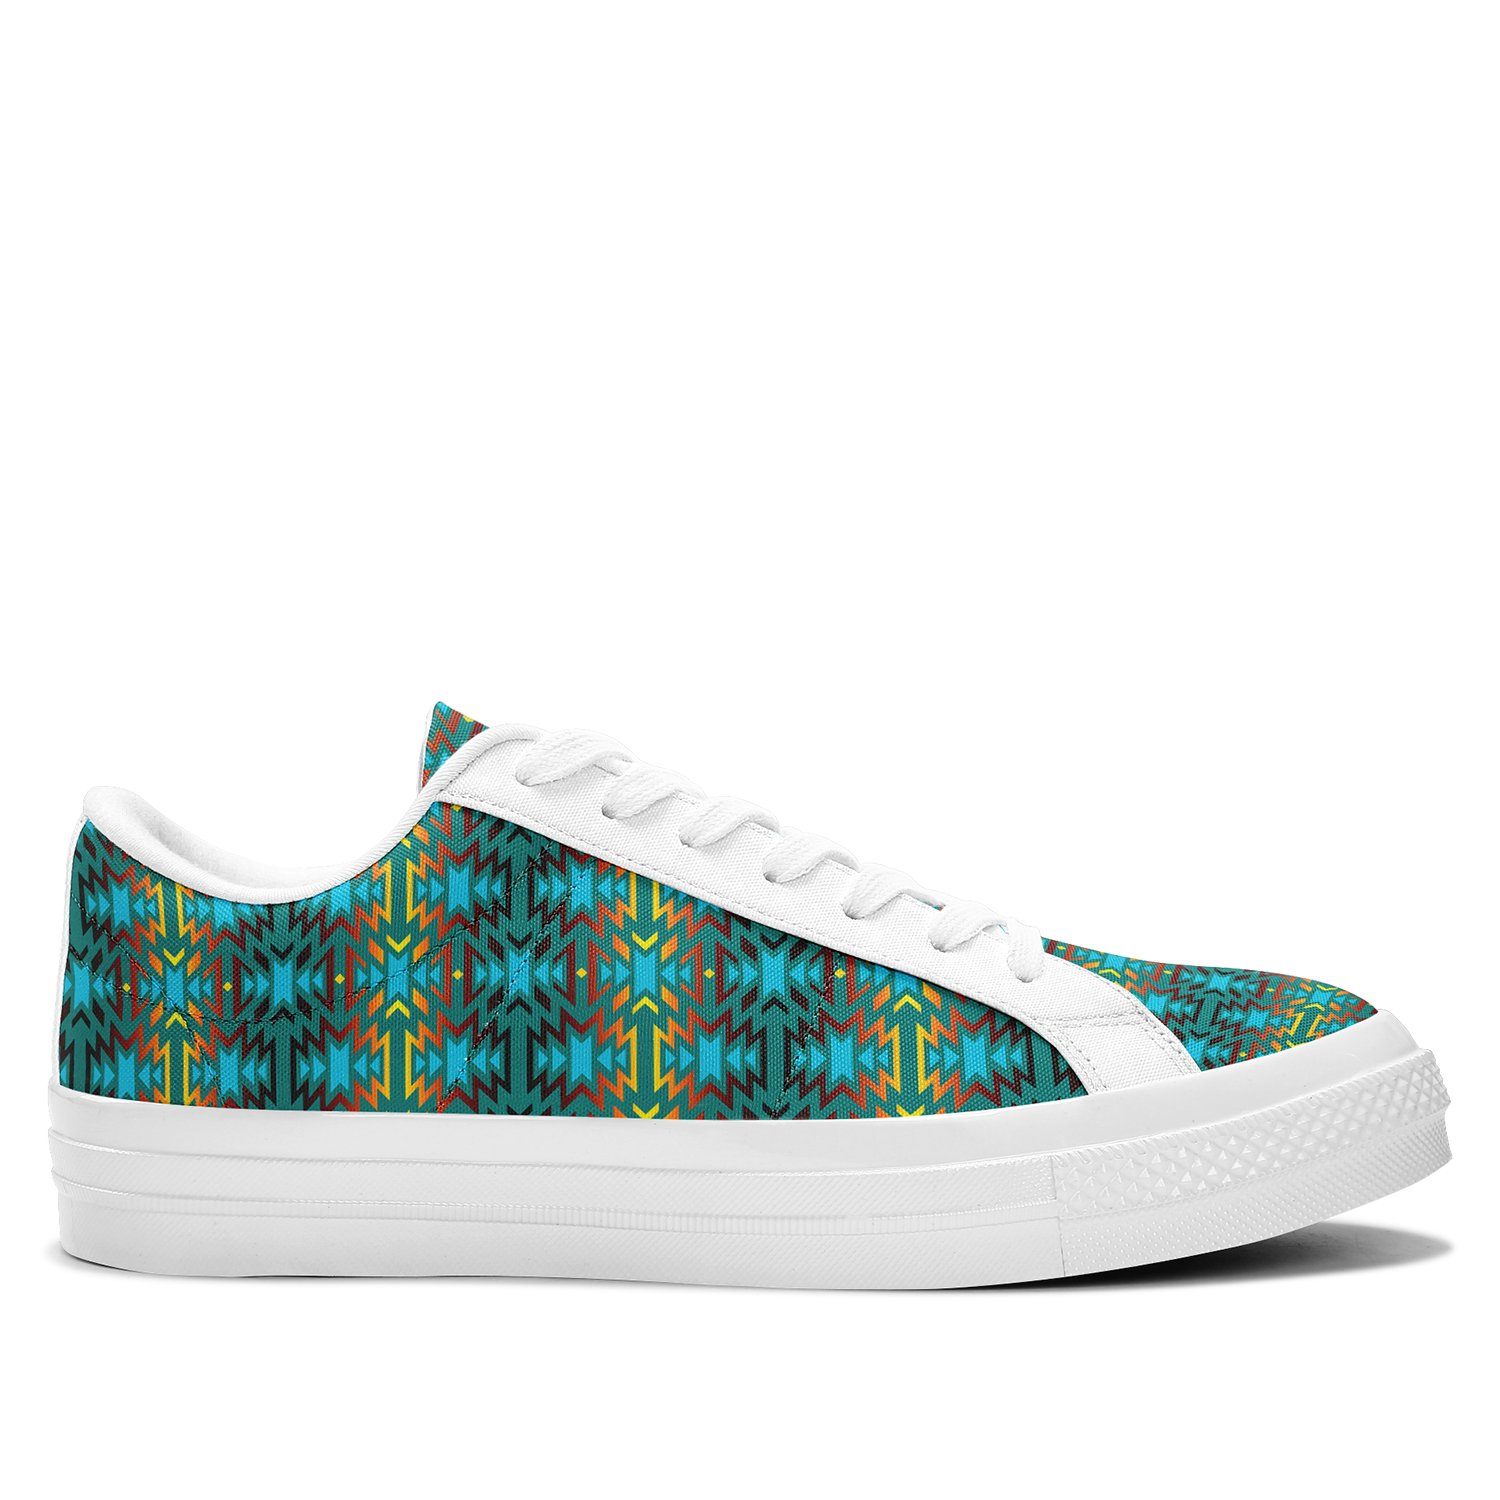 Fire Colors and Turquoise Teal Aapisi Low Top Canvas Shoes White Sole 49 Dzine 